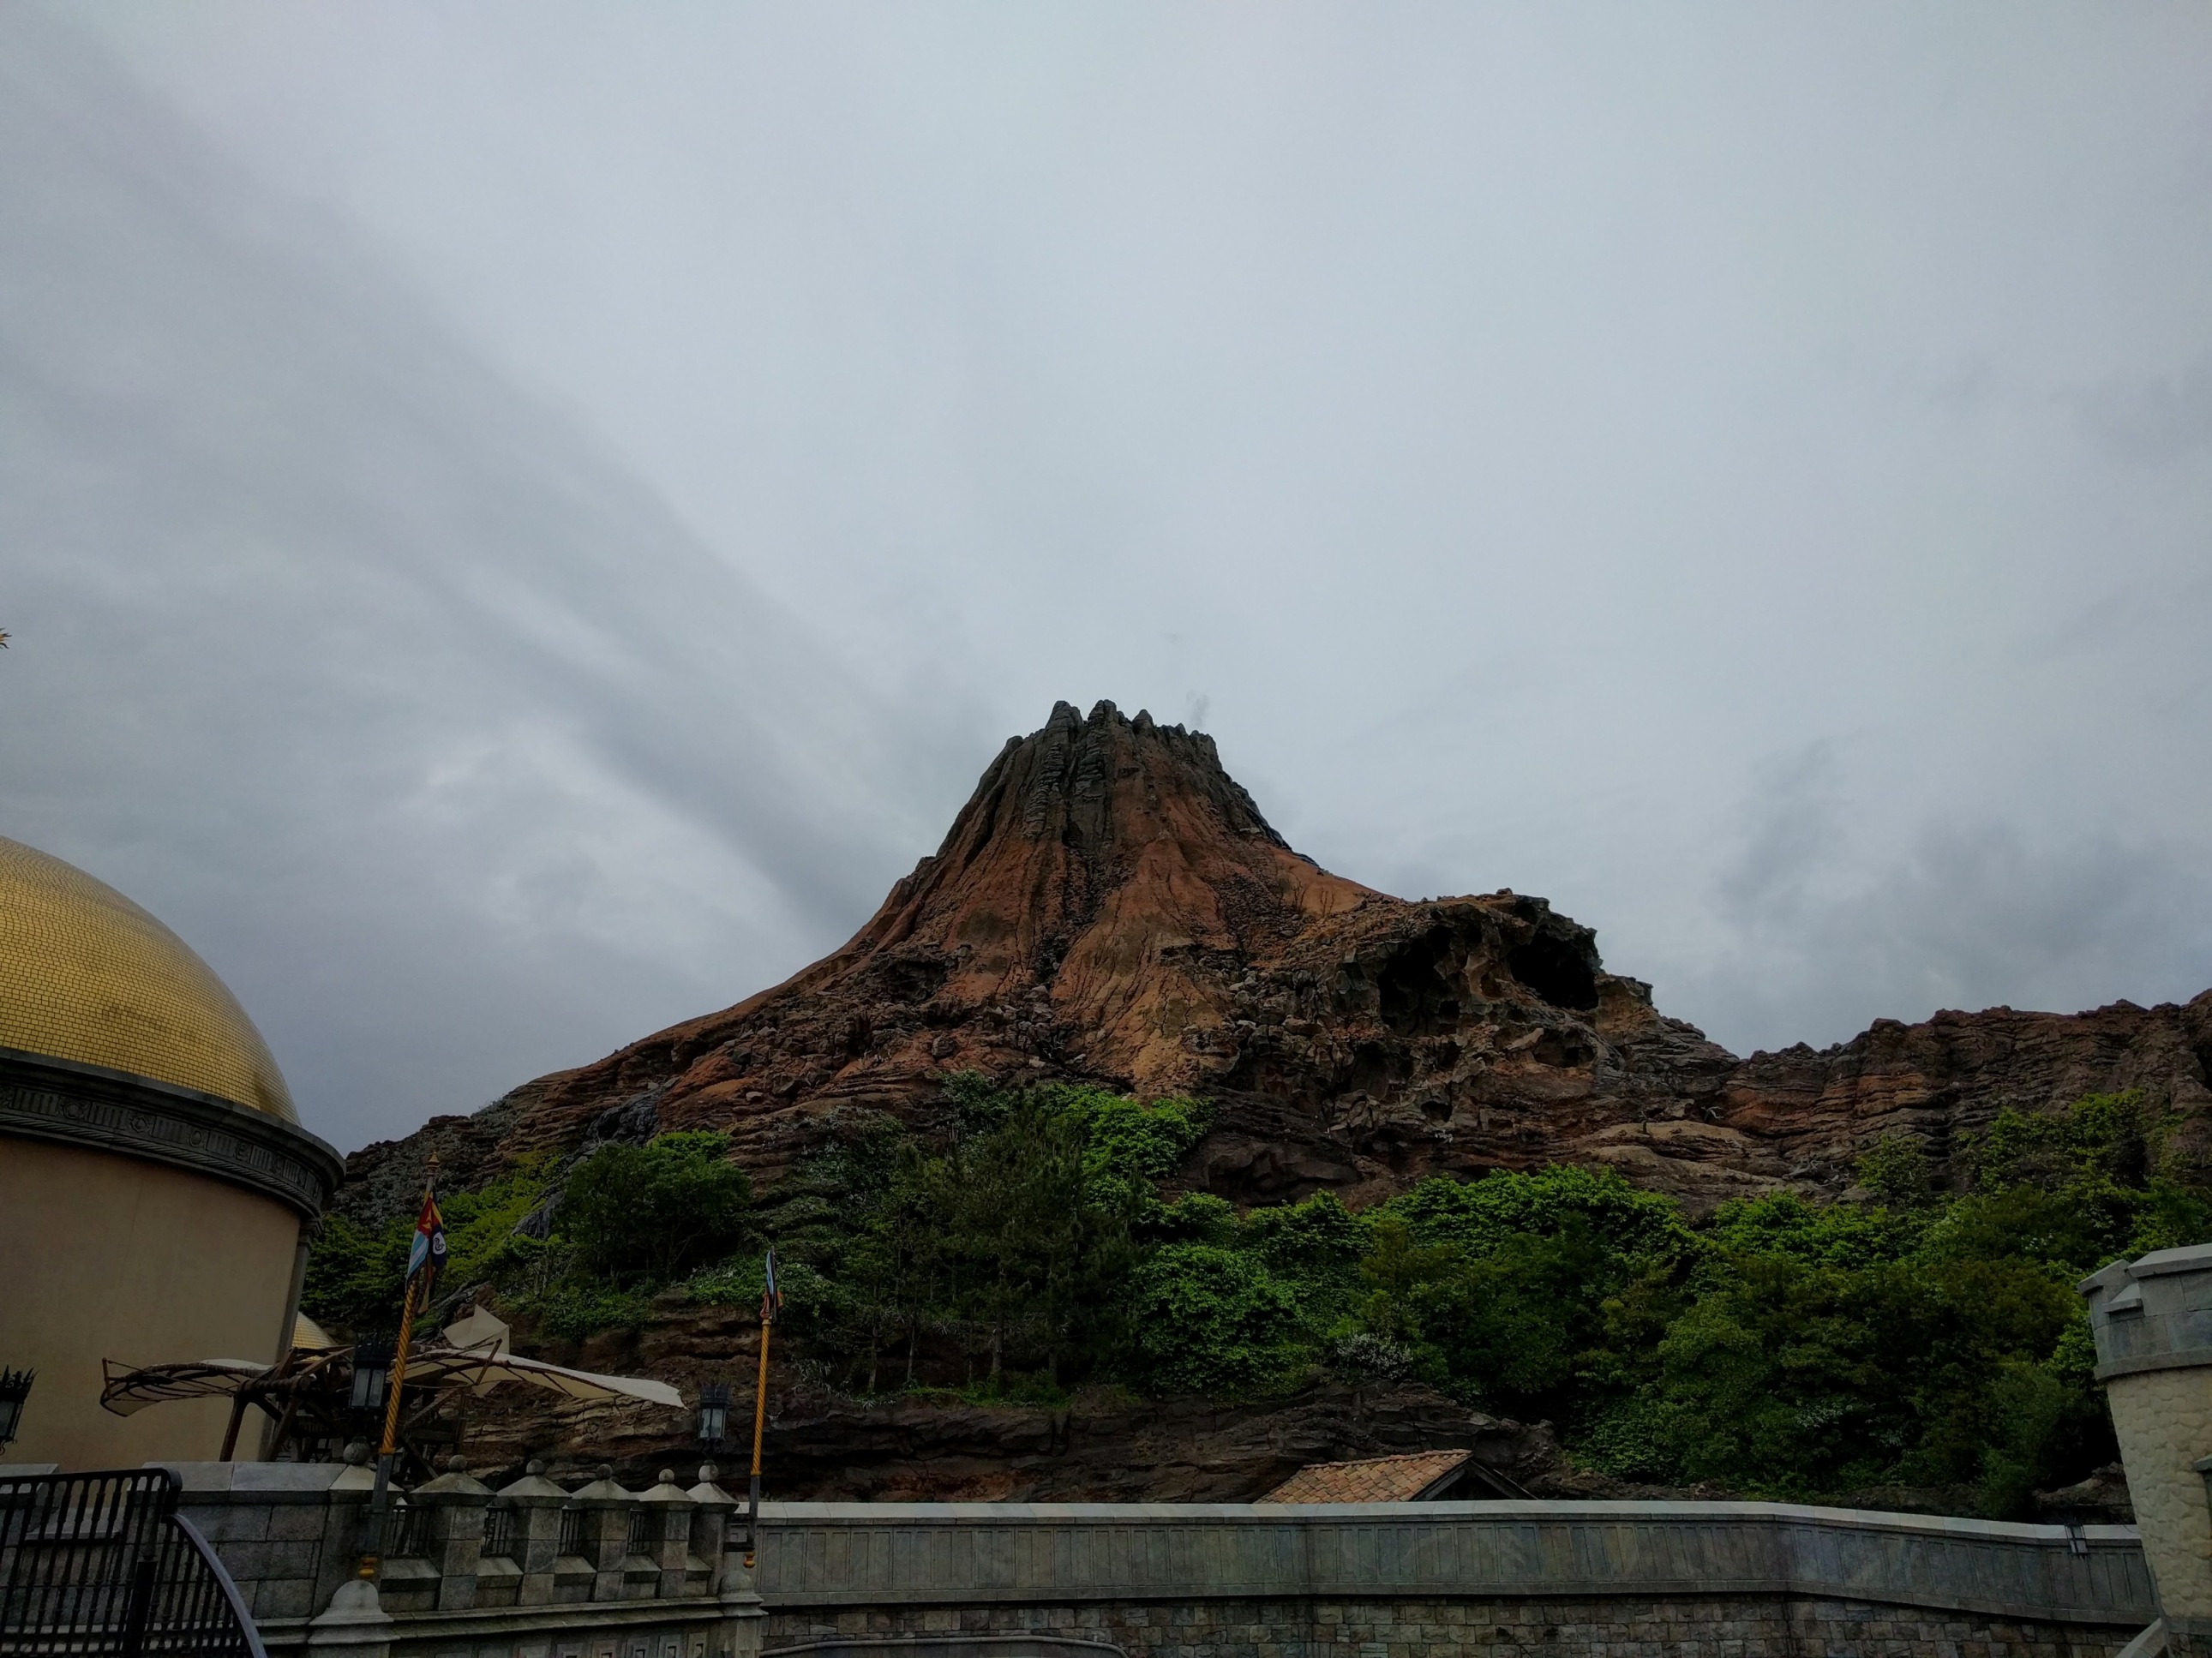 The Mysterious Island dominates the park.